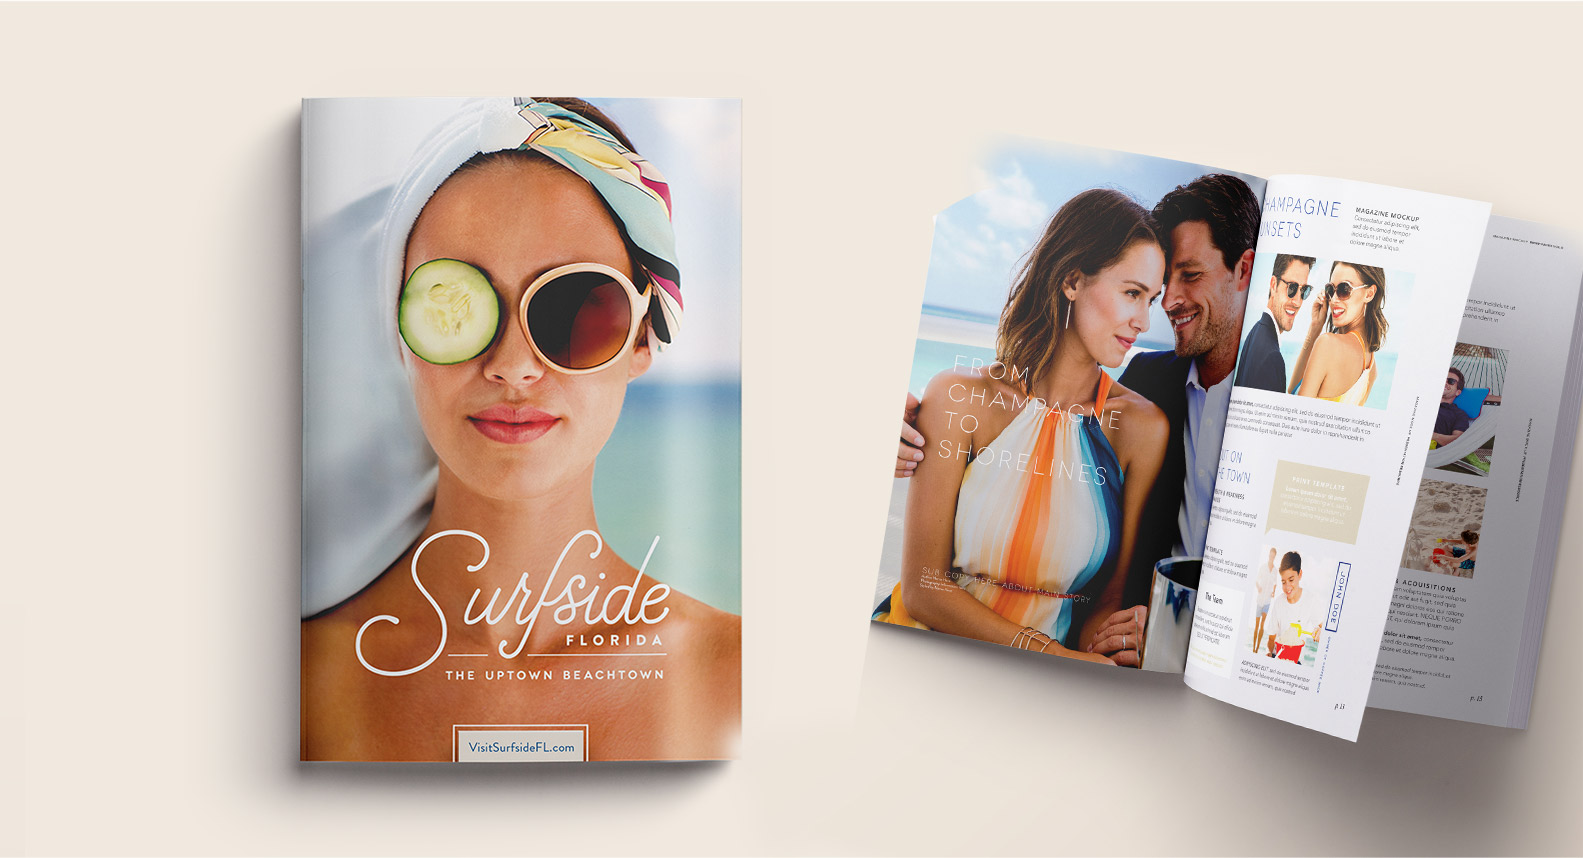 Jacober Creative Identity and Campaign for the Town of Surfside Florida - Photo of Visitor Guide cover and spread featuring a Surfside ad